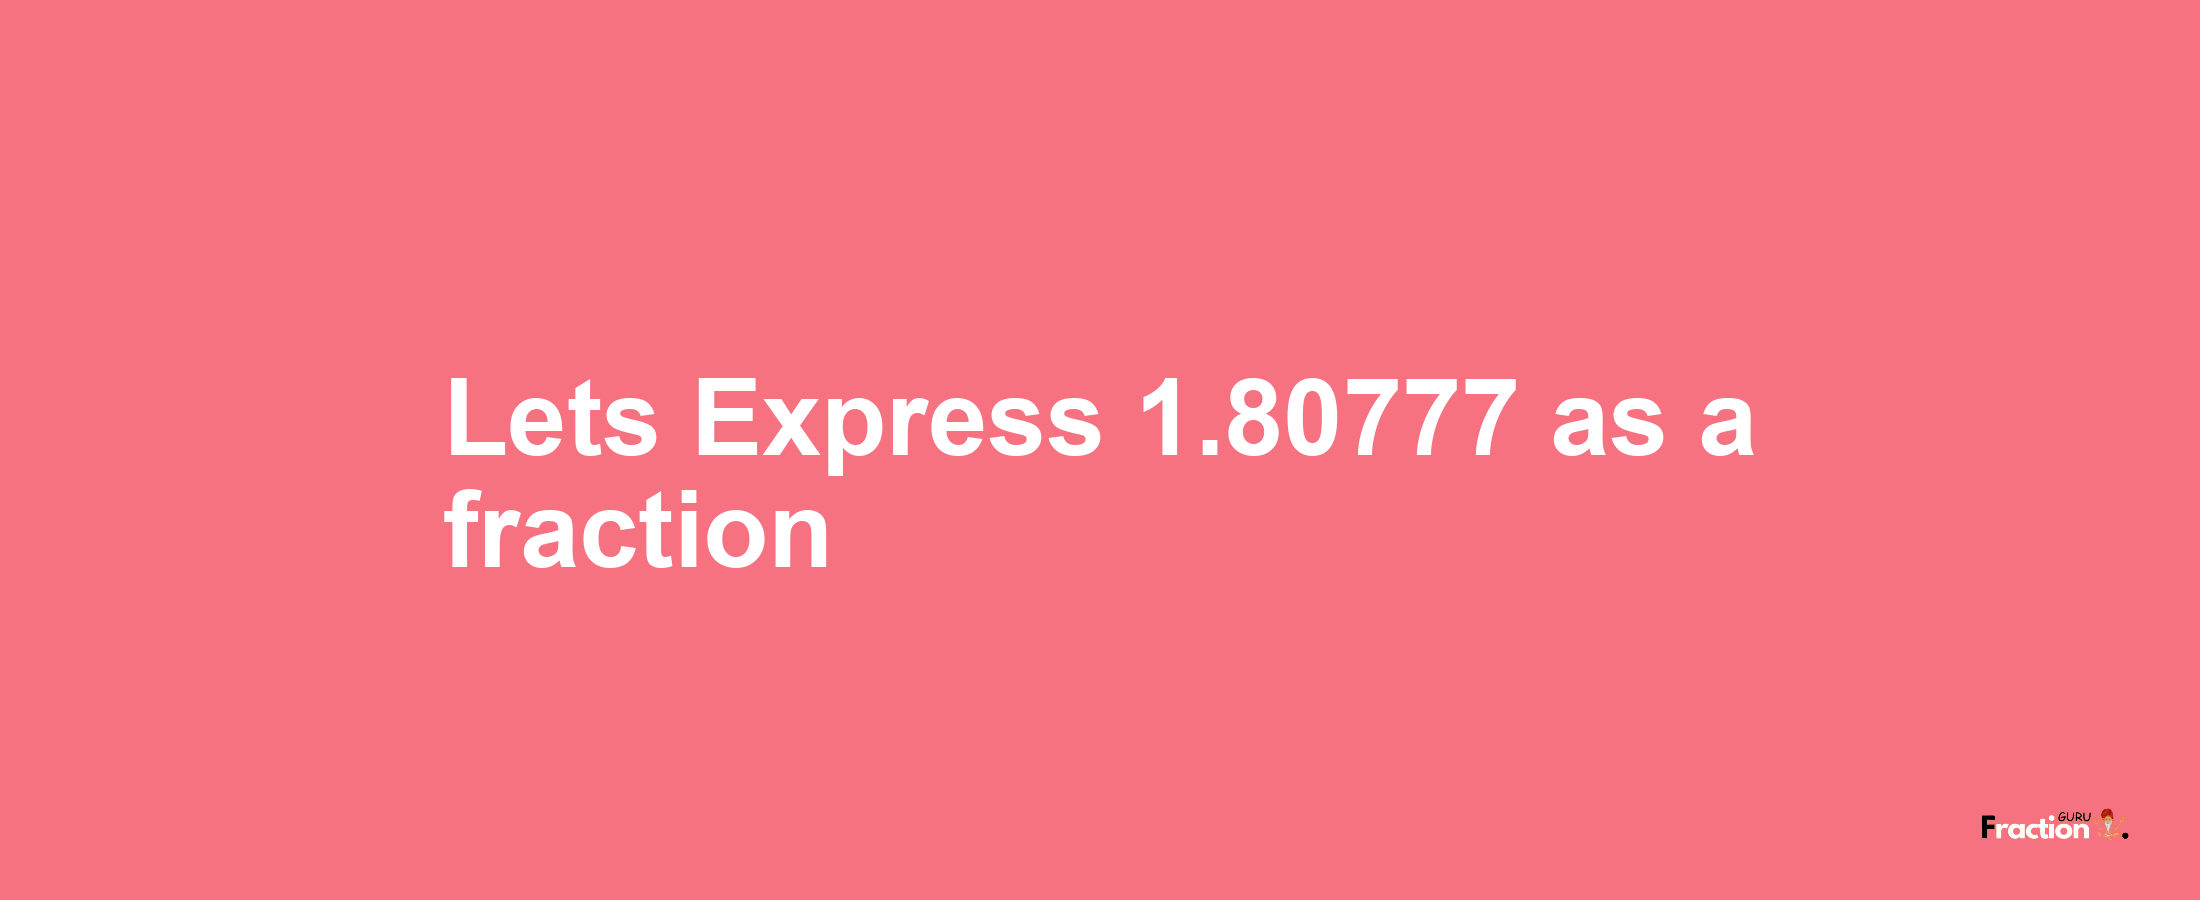 Lets Express 1.80777 as afraction